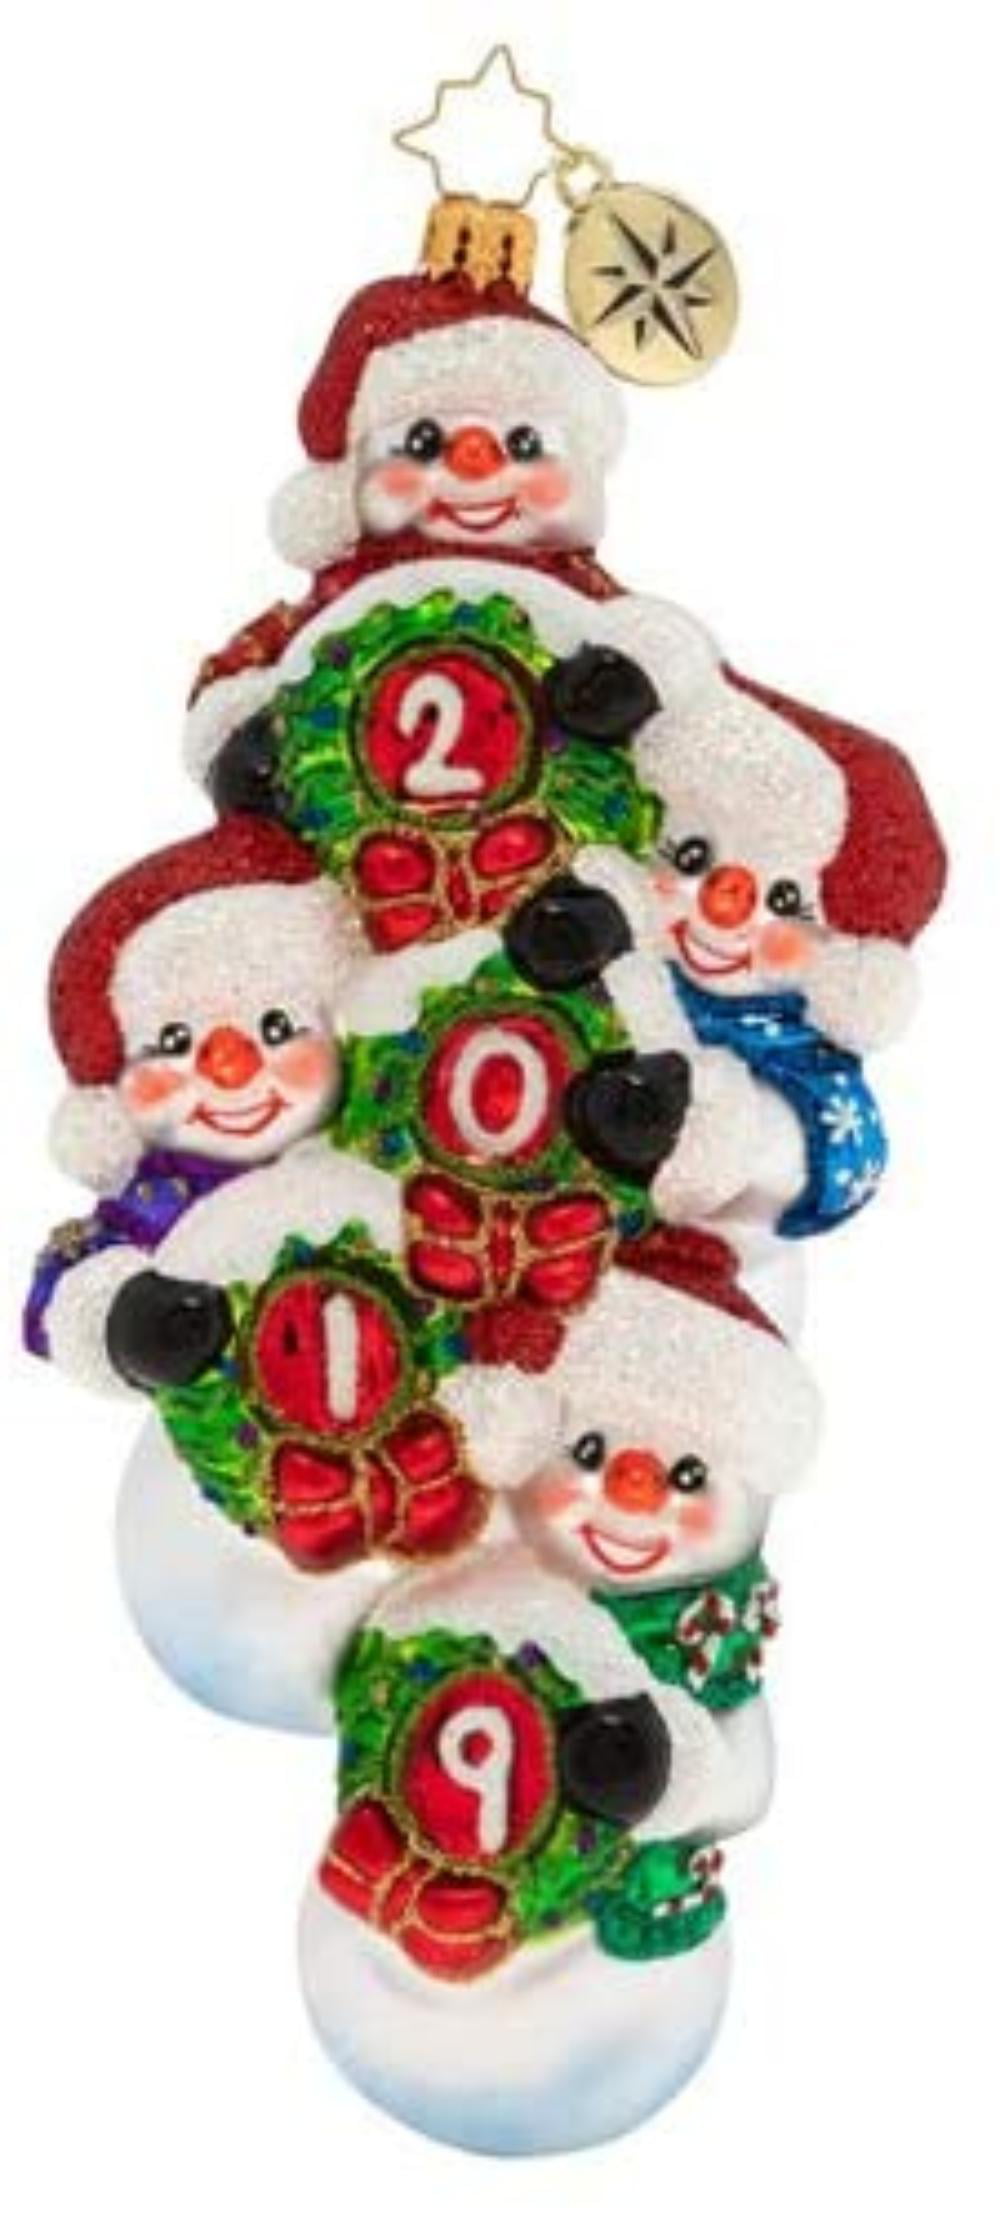 Christopher Radko Hand-Crafted European Glass Christmas Decorative Ornament Time to Celebrate! 